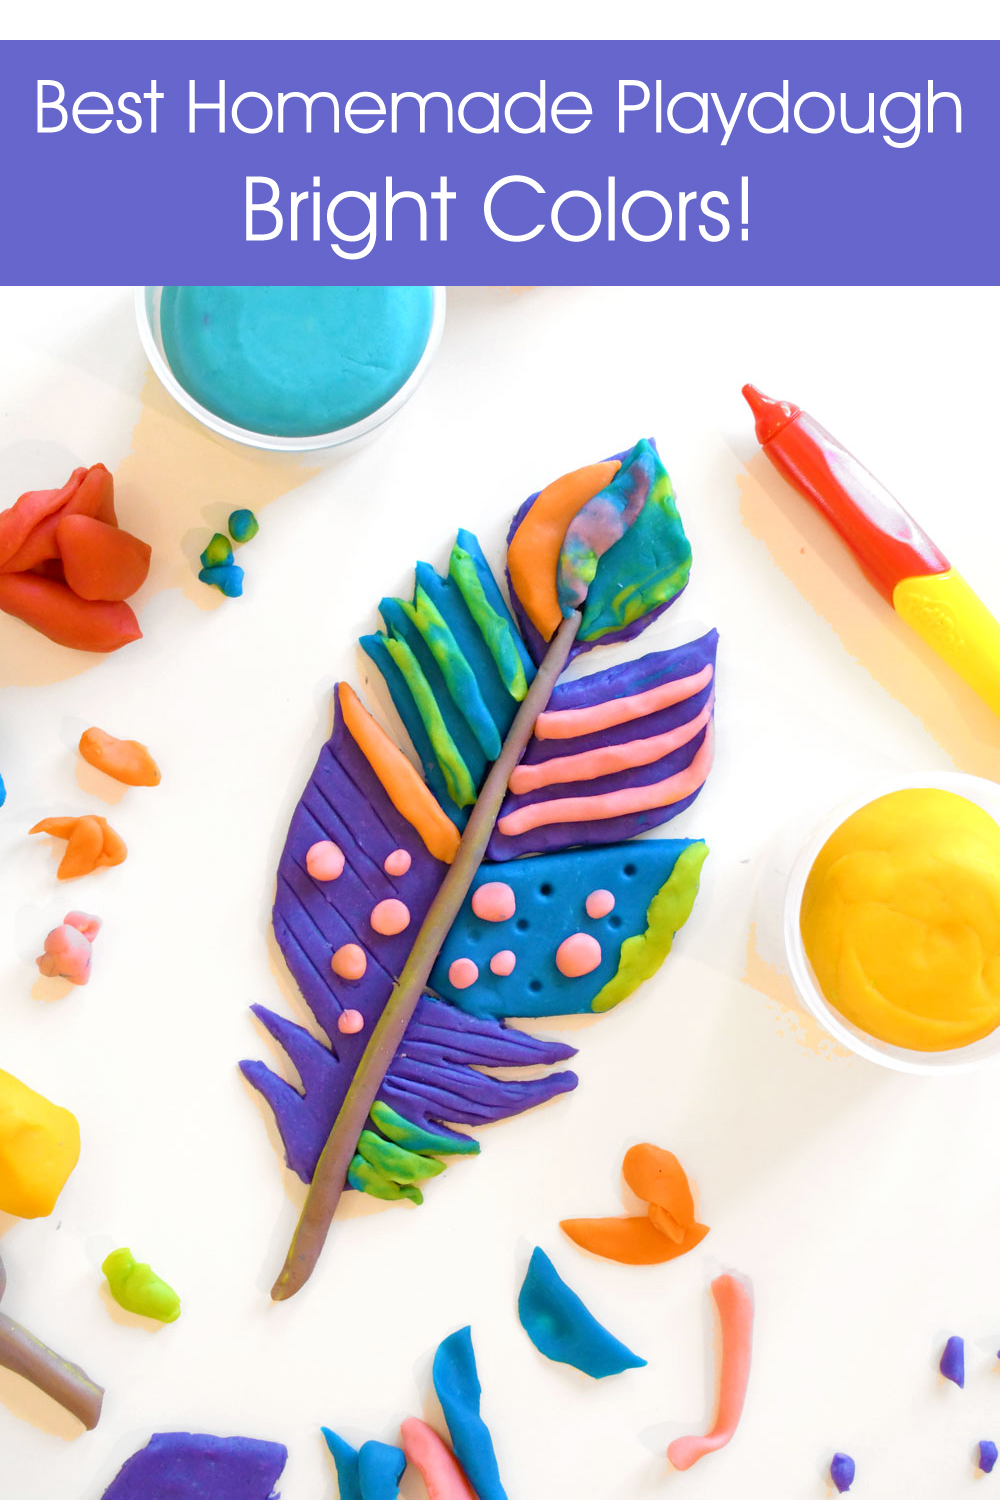 The best homemade playdough bright colors easy kids activity